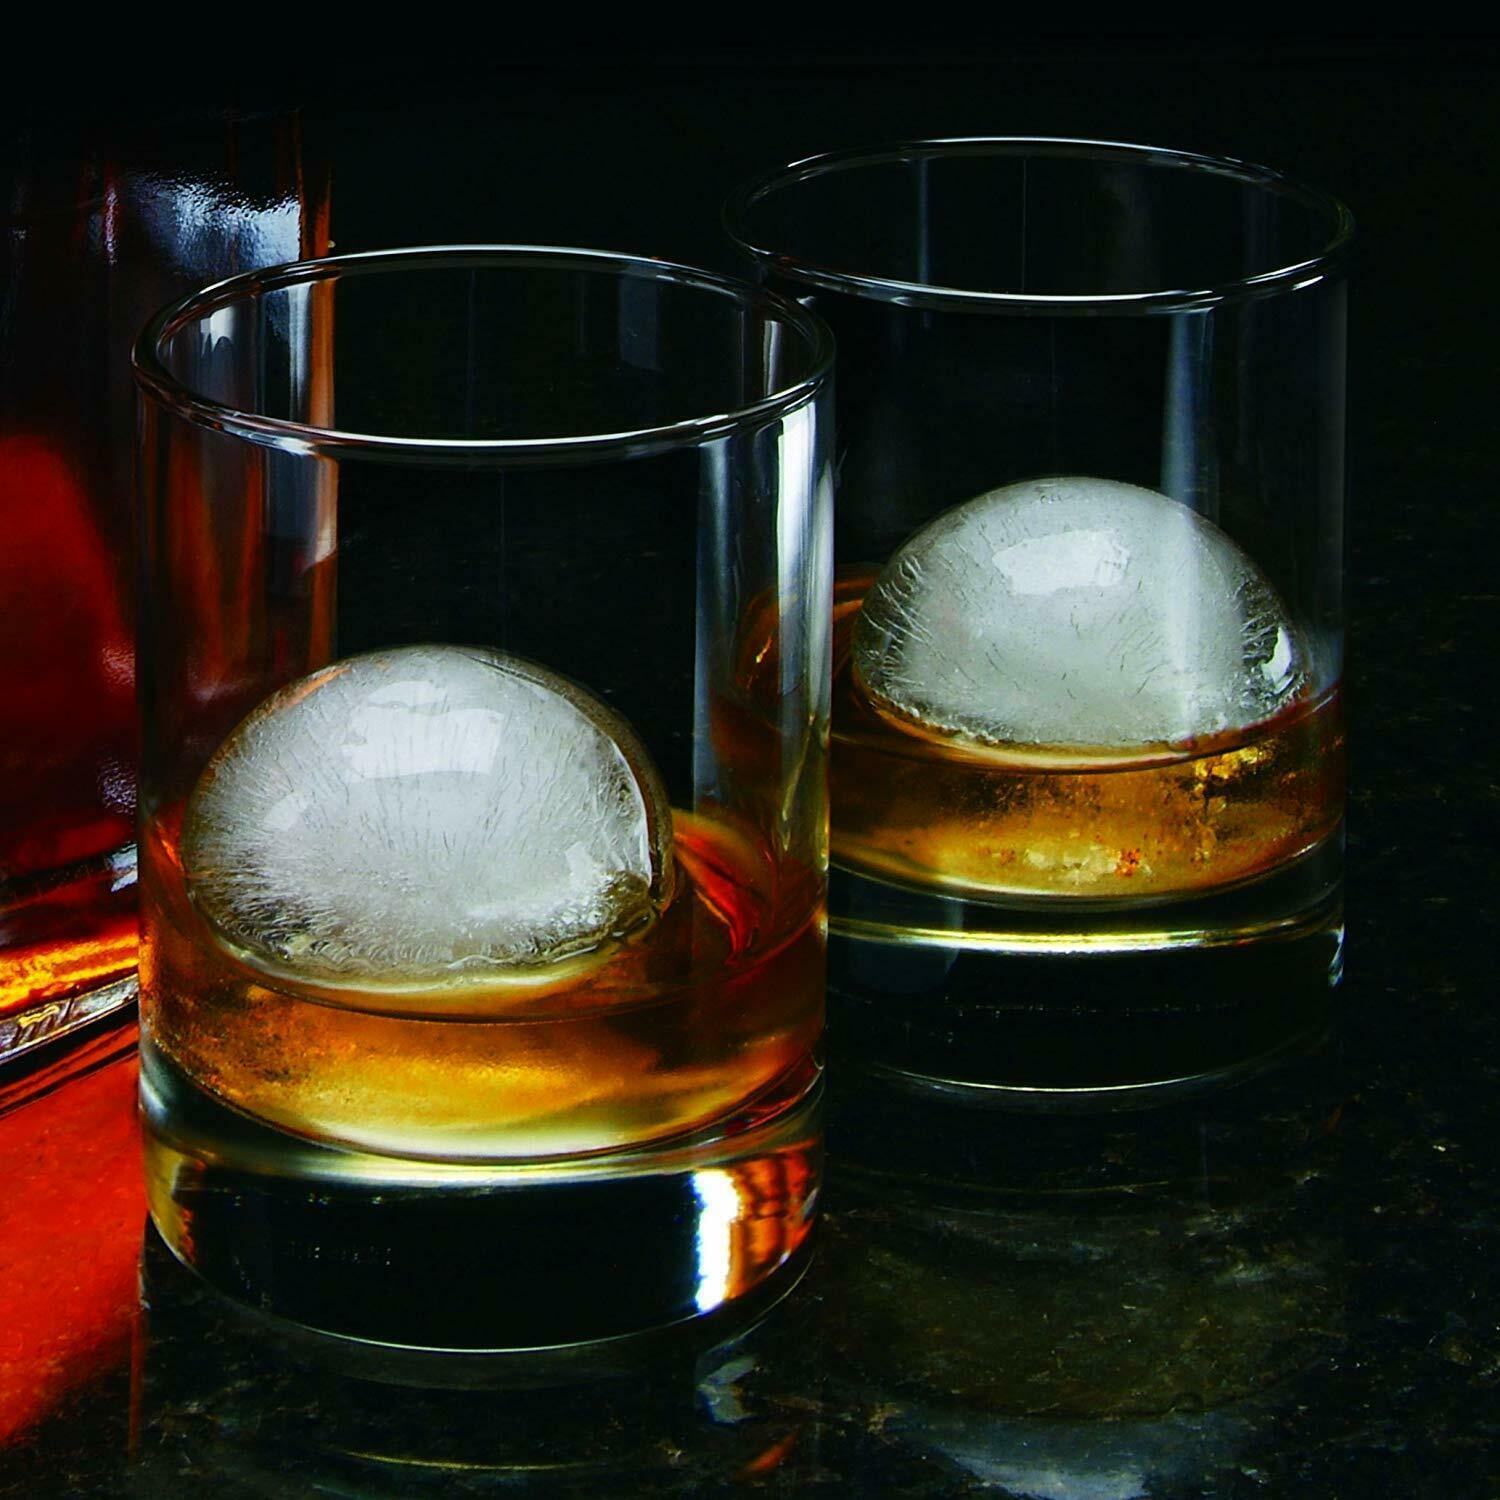 Ice Ball Mold - 2.5 inch Round Sphere Large Silicone Ice Cube Tray, BP –  Alchemy Superior Goods